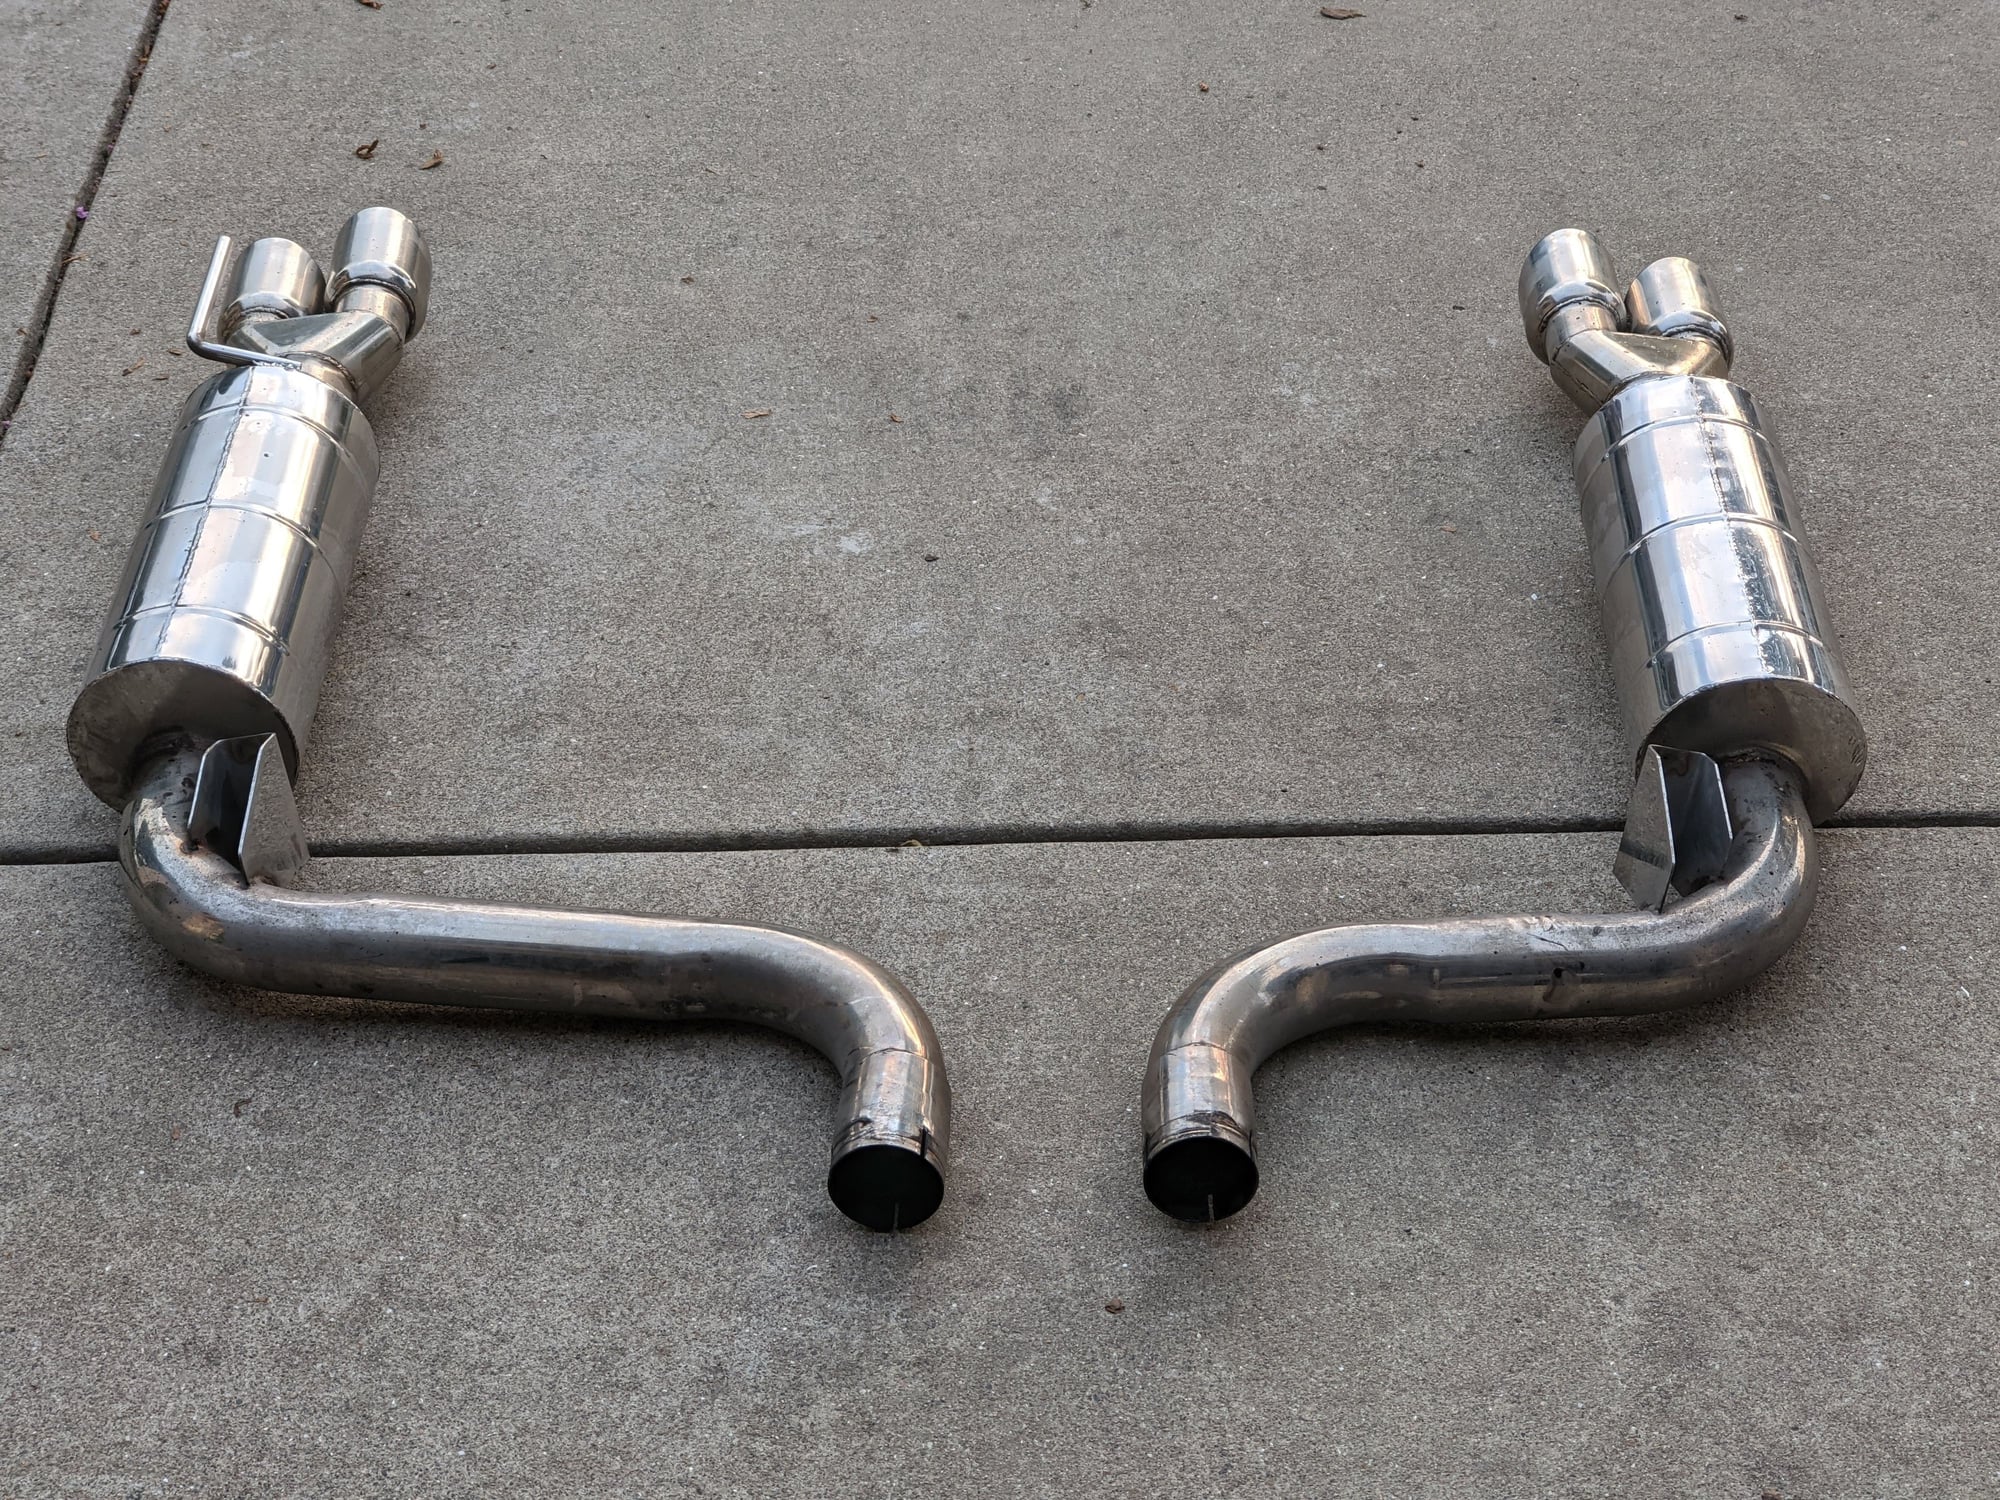 Engine - Exhaust - Elite RR Axleback Exhaust (from the UK) for XF, XFR, XFR-S - Used - 2009 to 2015 Jaguar XF - 2009 to 2015 Jaguar XFR - 2009 to 2015 Jaguar XFR-S - Bay Area, CA 95035, United States